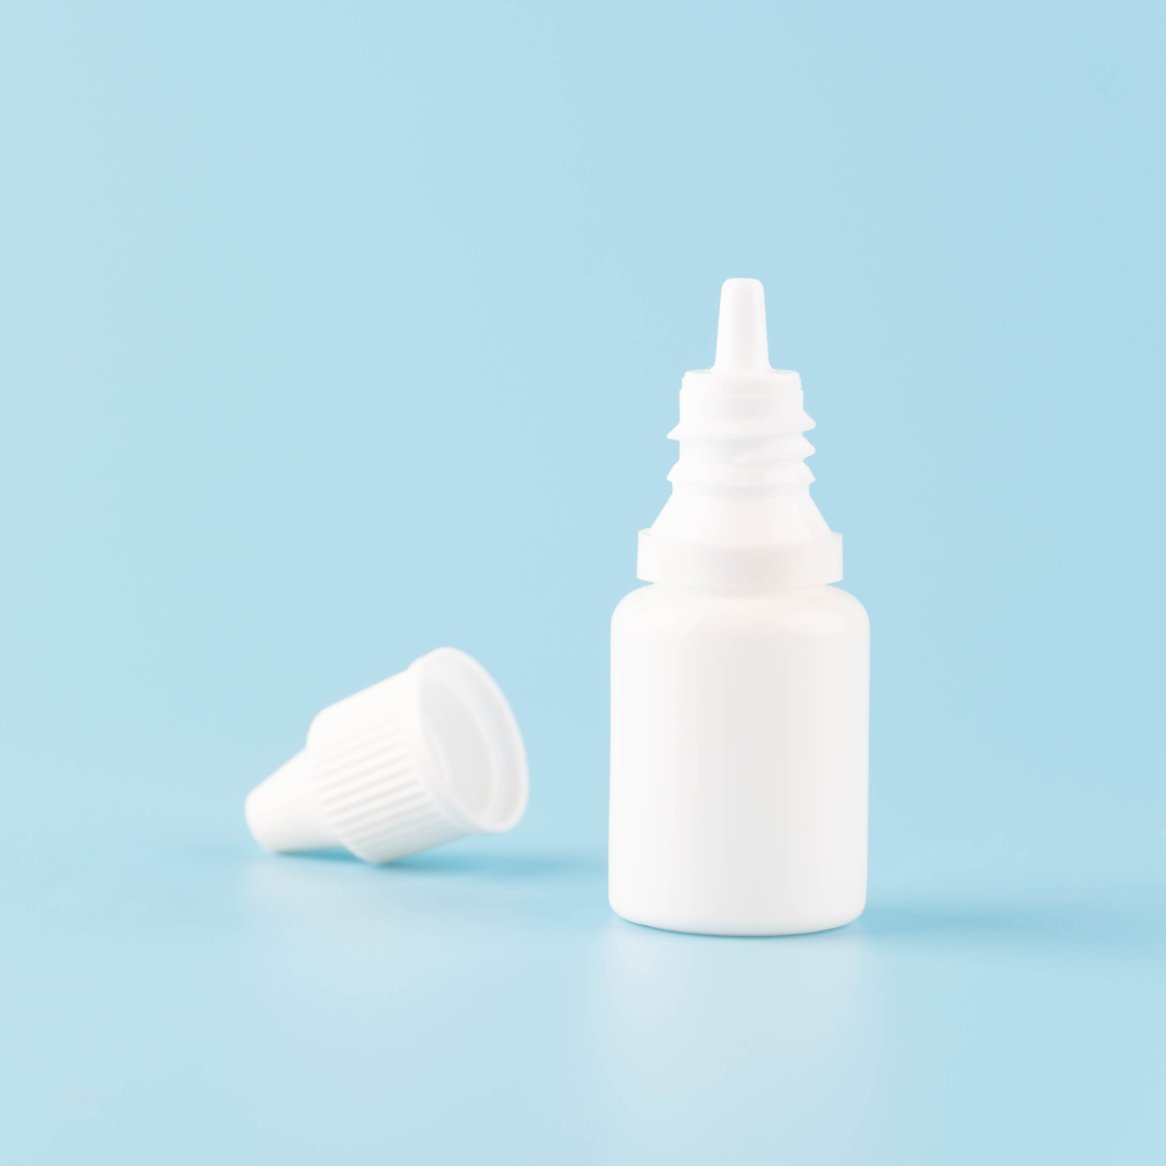 Close-up image of a bottle of eye drops